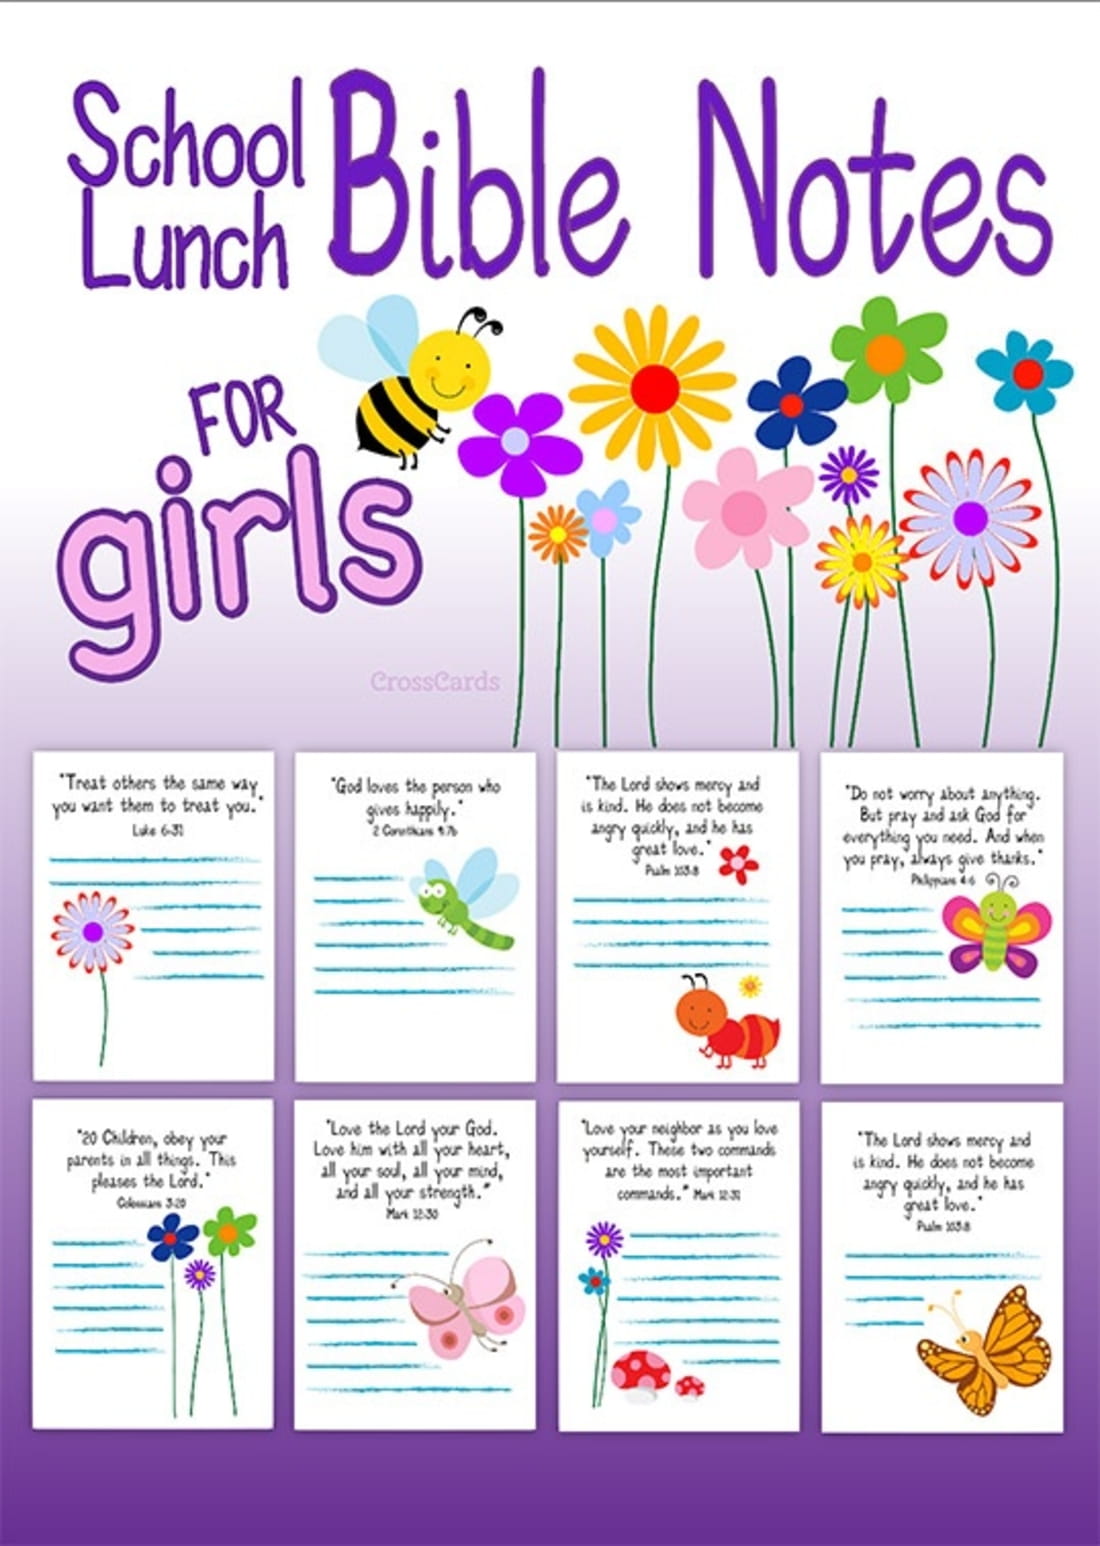 School Lunch Bible Notes for Girls - Free Printable